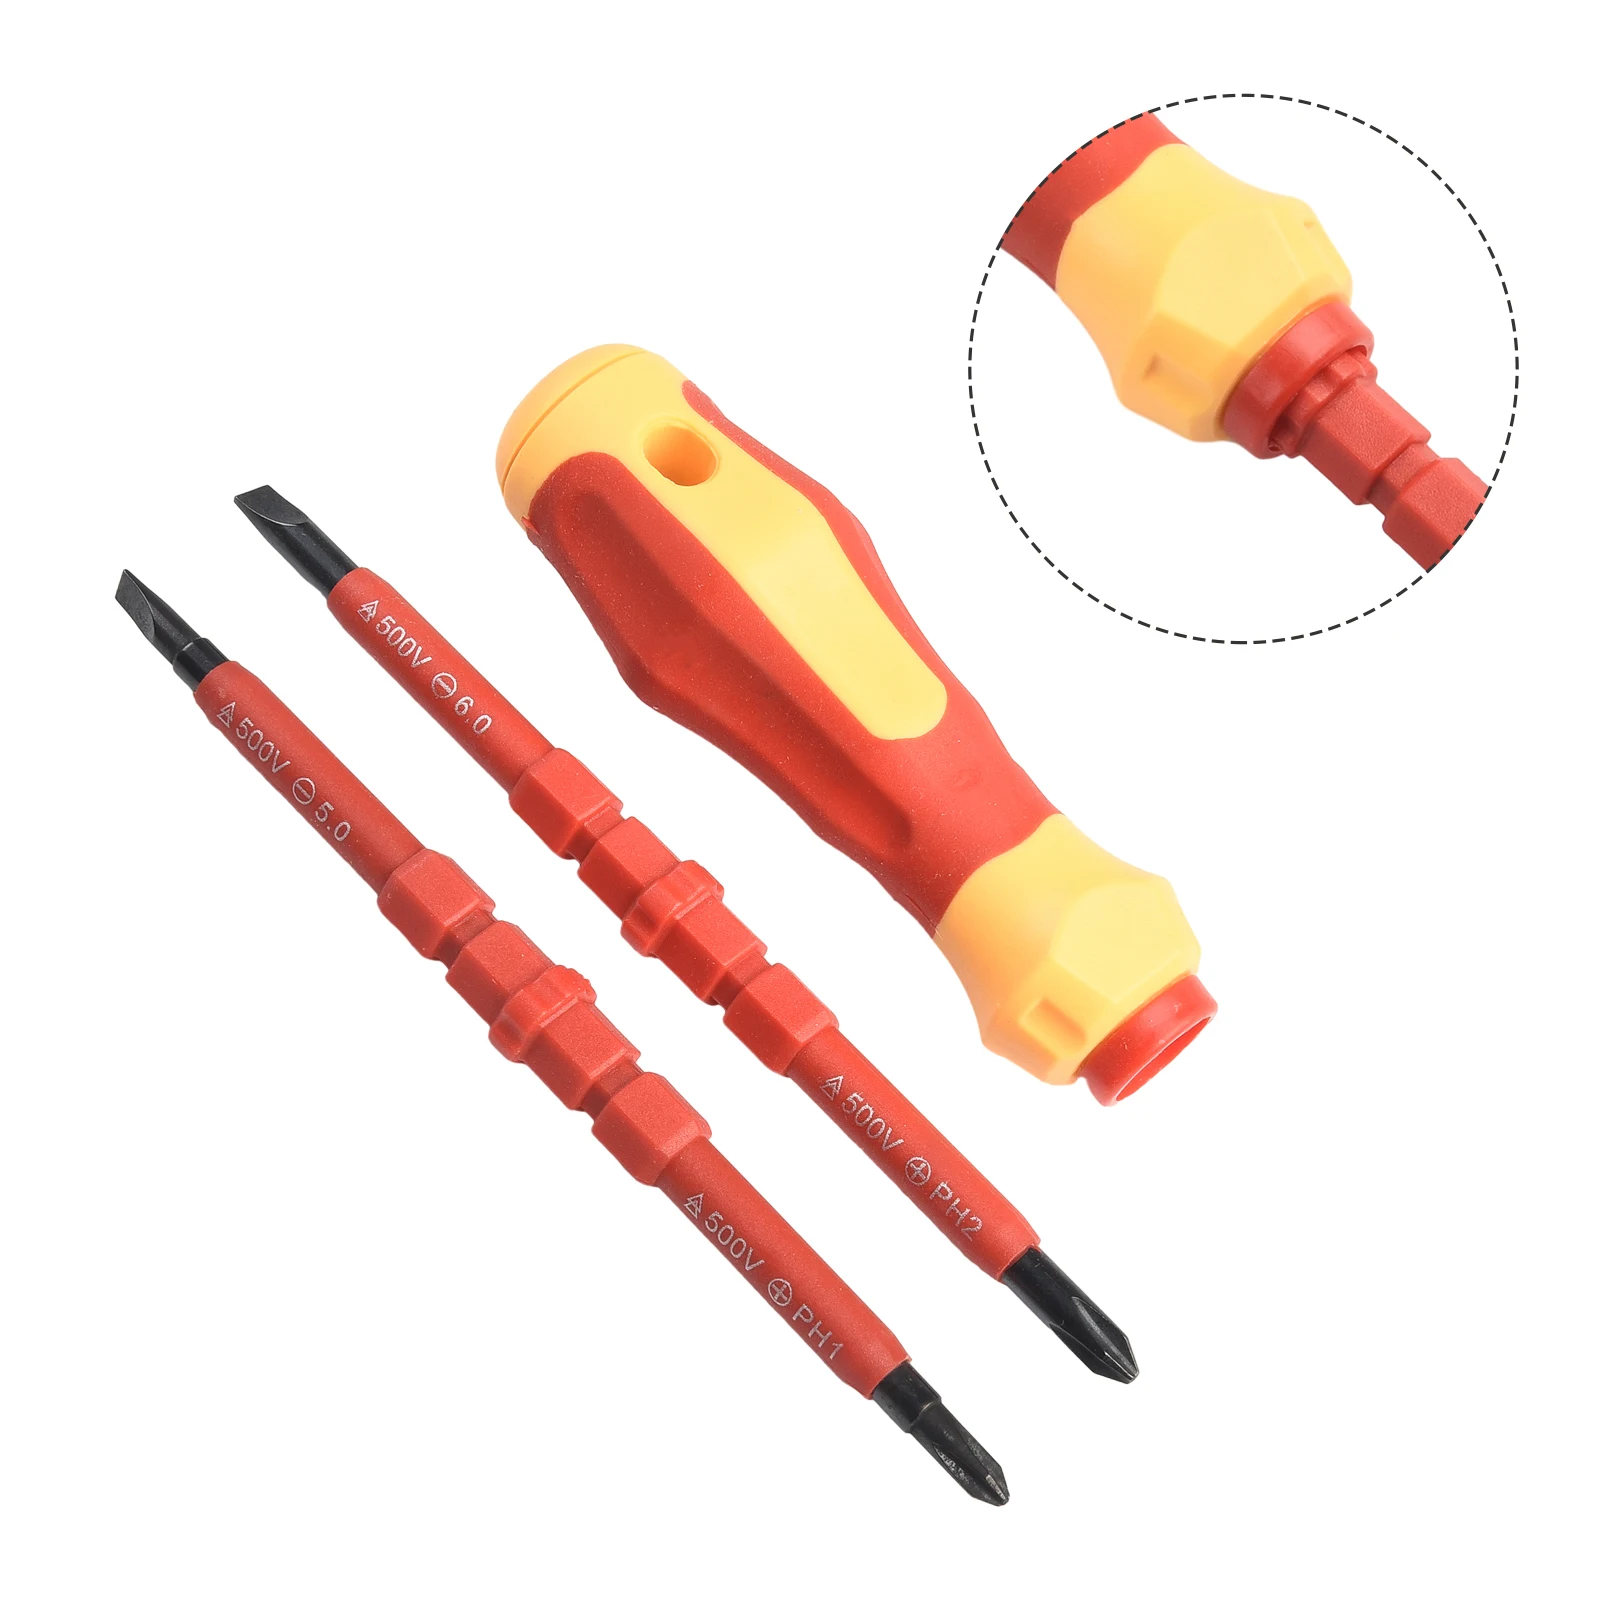 

3 Pcs/set Electrician Screwdriver Bits Good Wear Resistance Using The PP + TPR Rubber-coated Insulation Treatment Multi Purpose